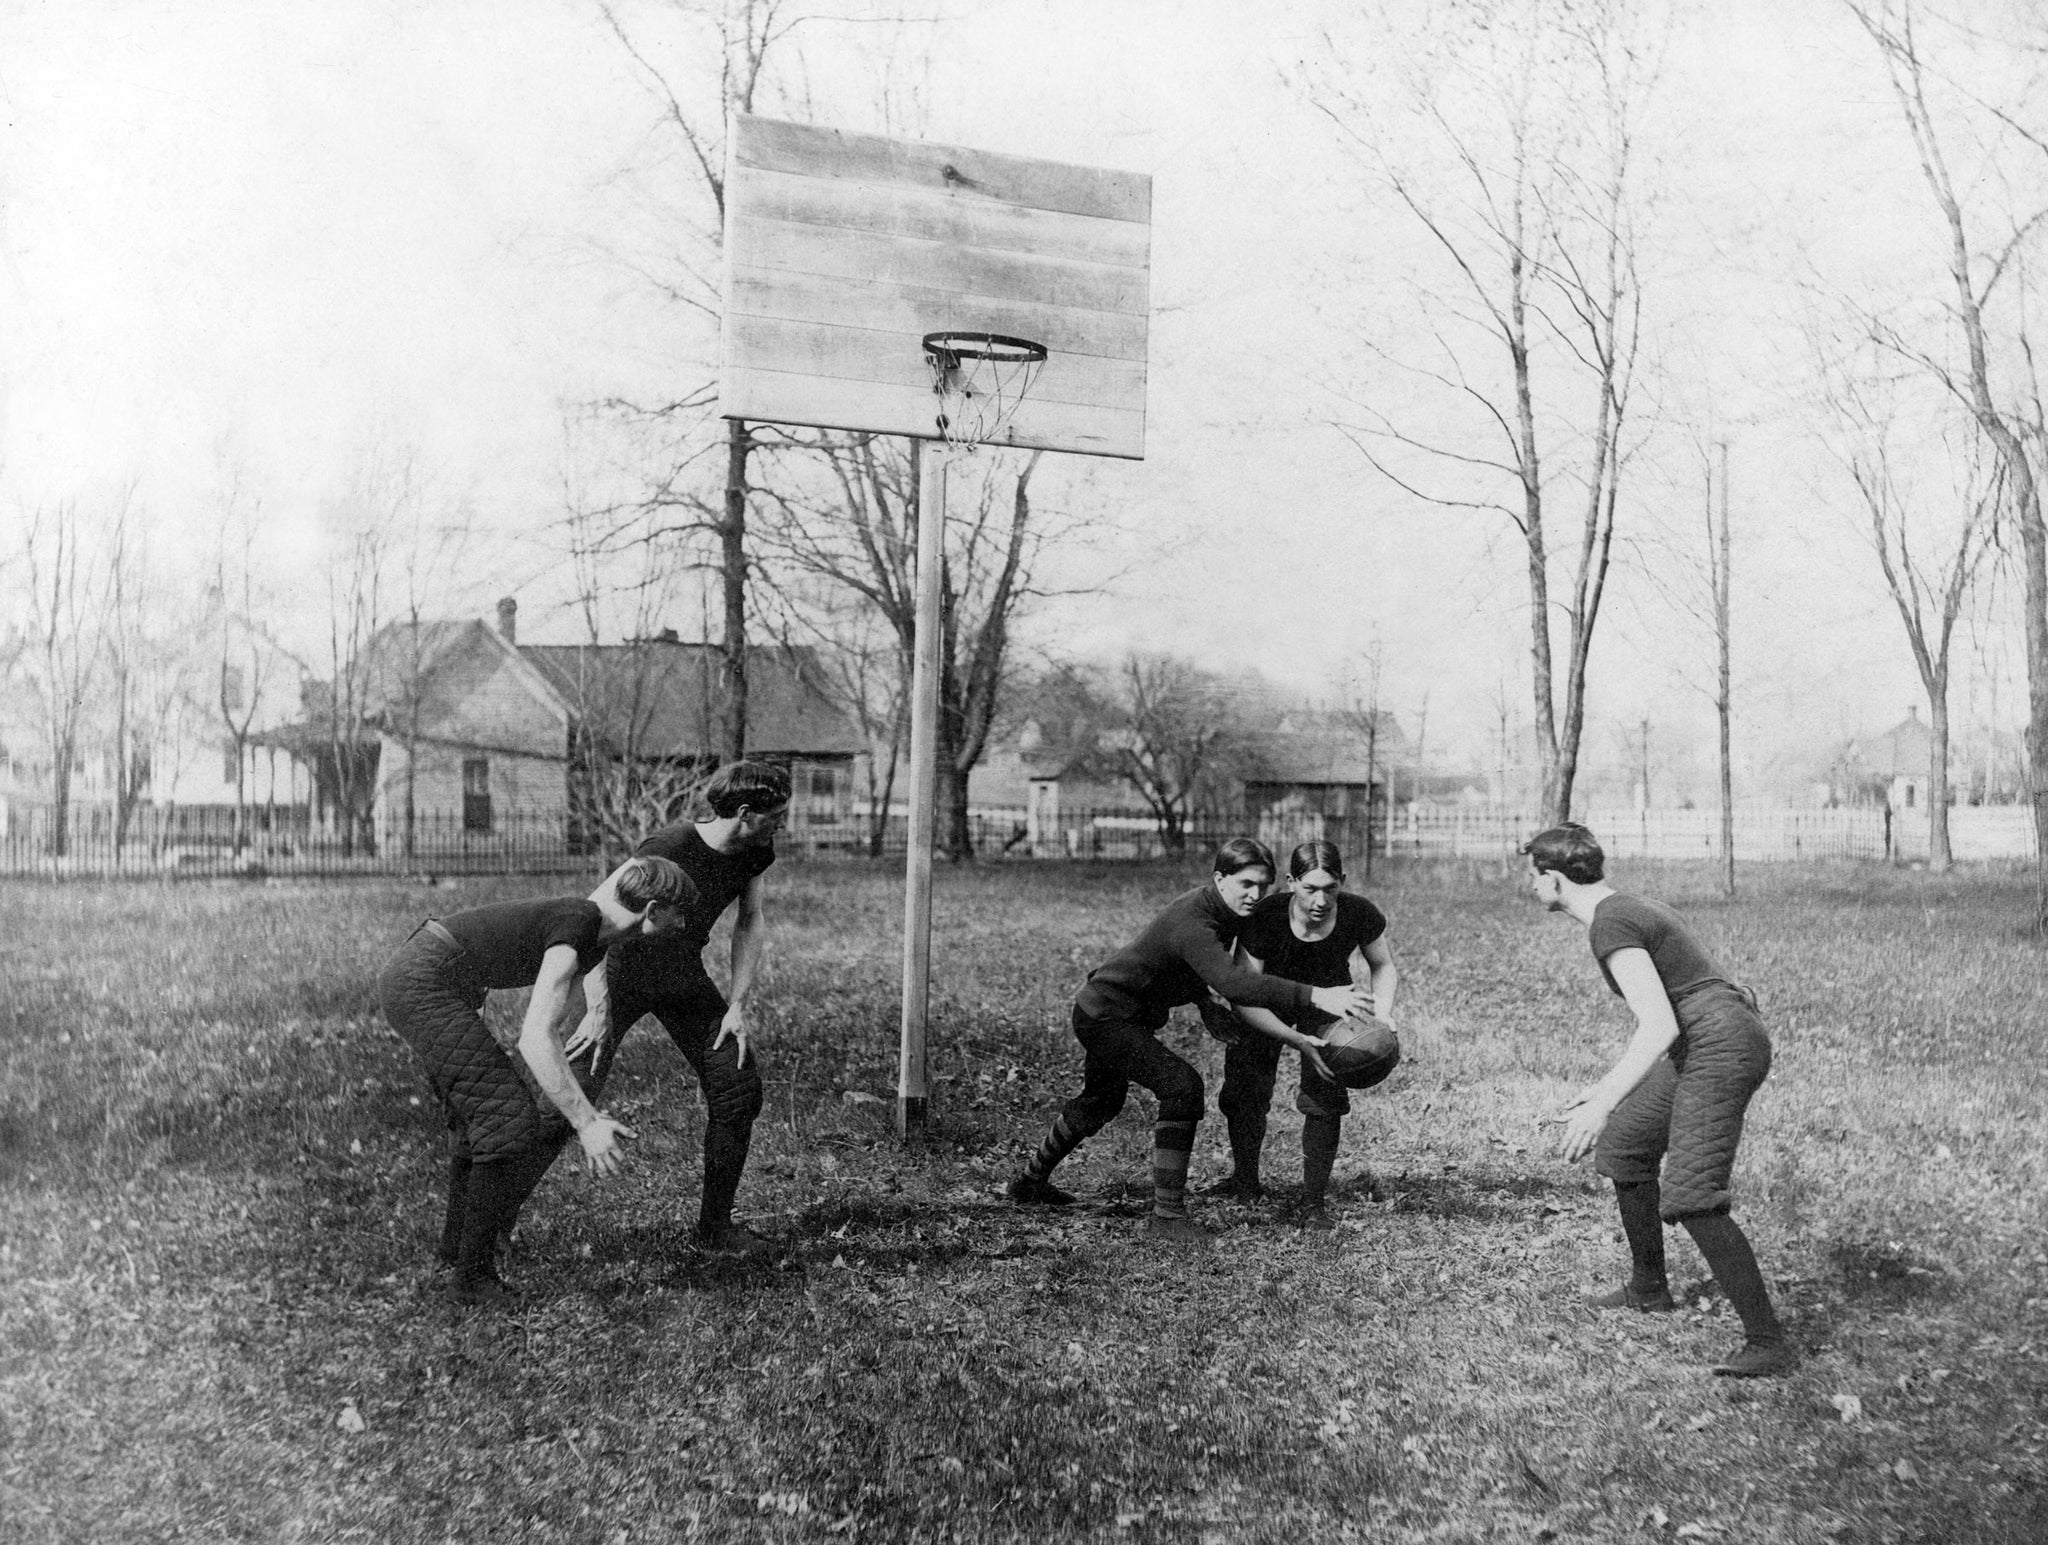 Boys practicing basketball on the Southern Illinois Normal University campus, circa 1904. -- Southern Illinois University Archives, Southern Illinois University Carbondale Collection, Box 1-Folder 10